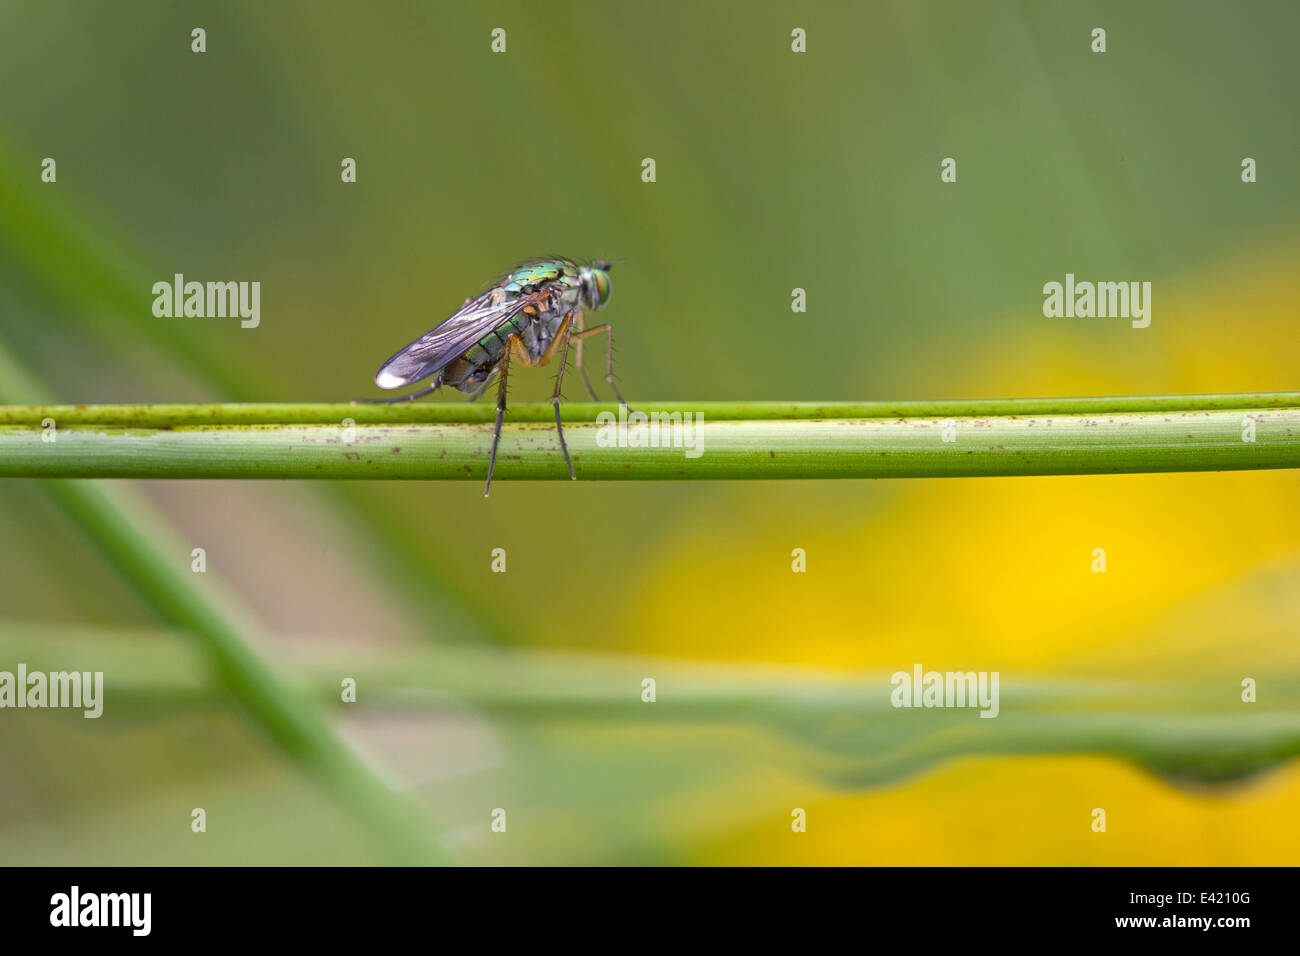 Imperial Fly sits on plant stem, Netherlands Stock Photo